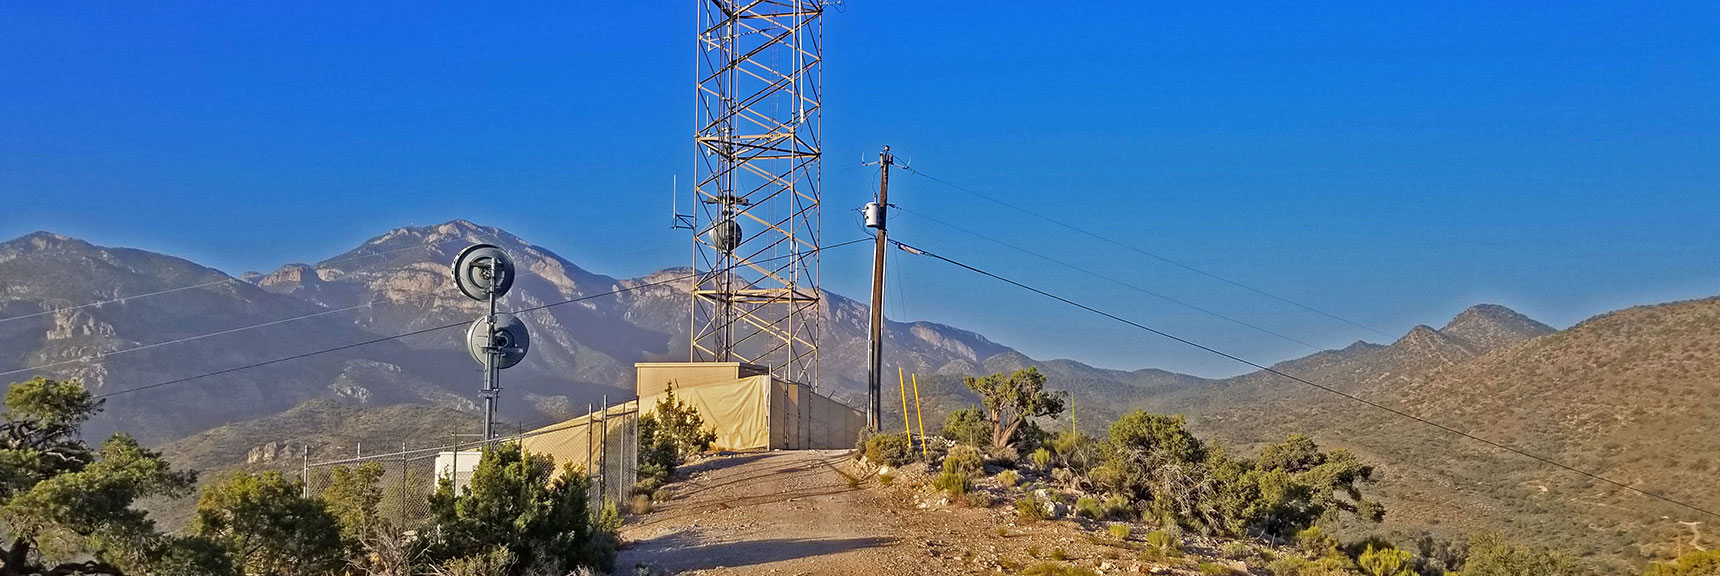 Trail Starts Behind Communications Tower Just North of Mountain Springs Trailhead | Rainbow Mountains Upper Crest Ridge, Nevada